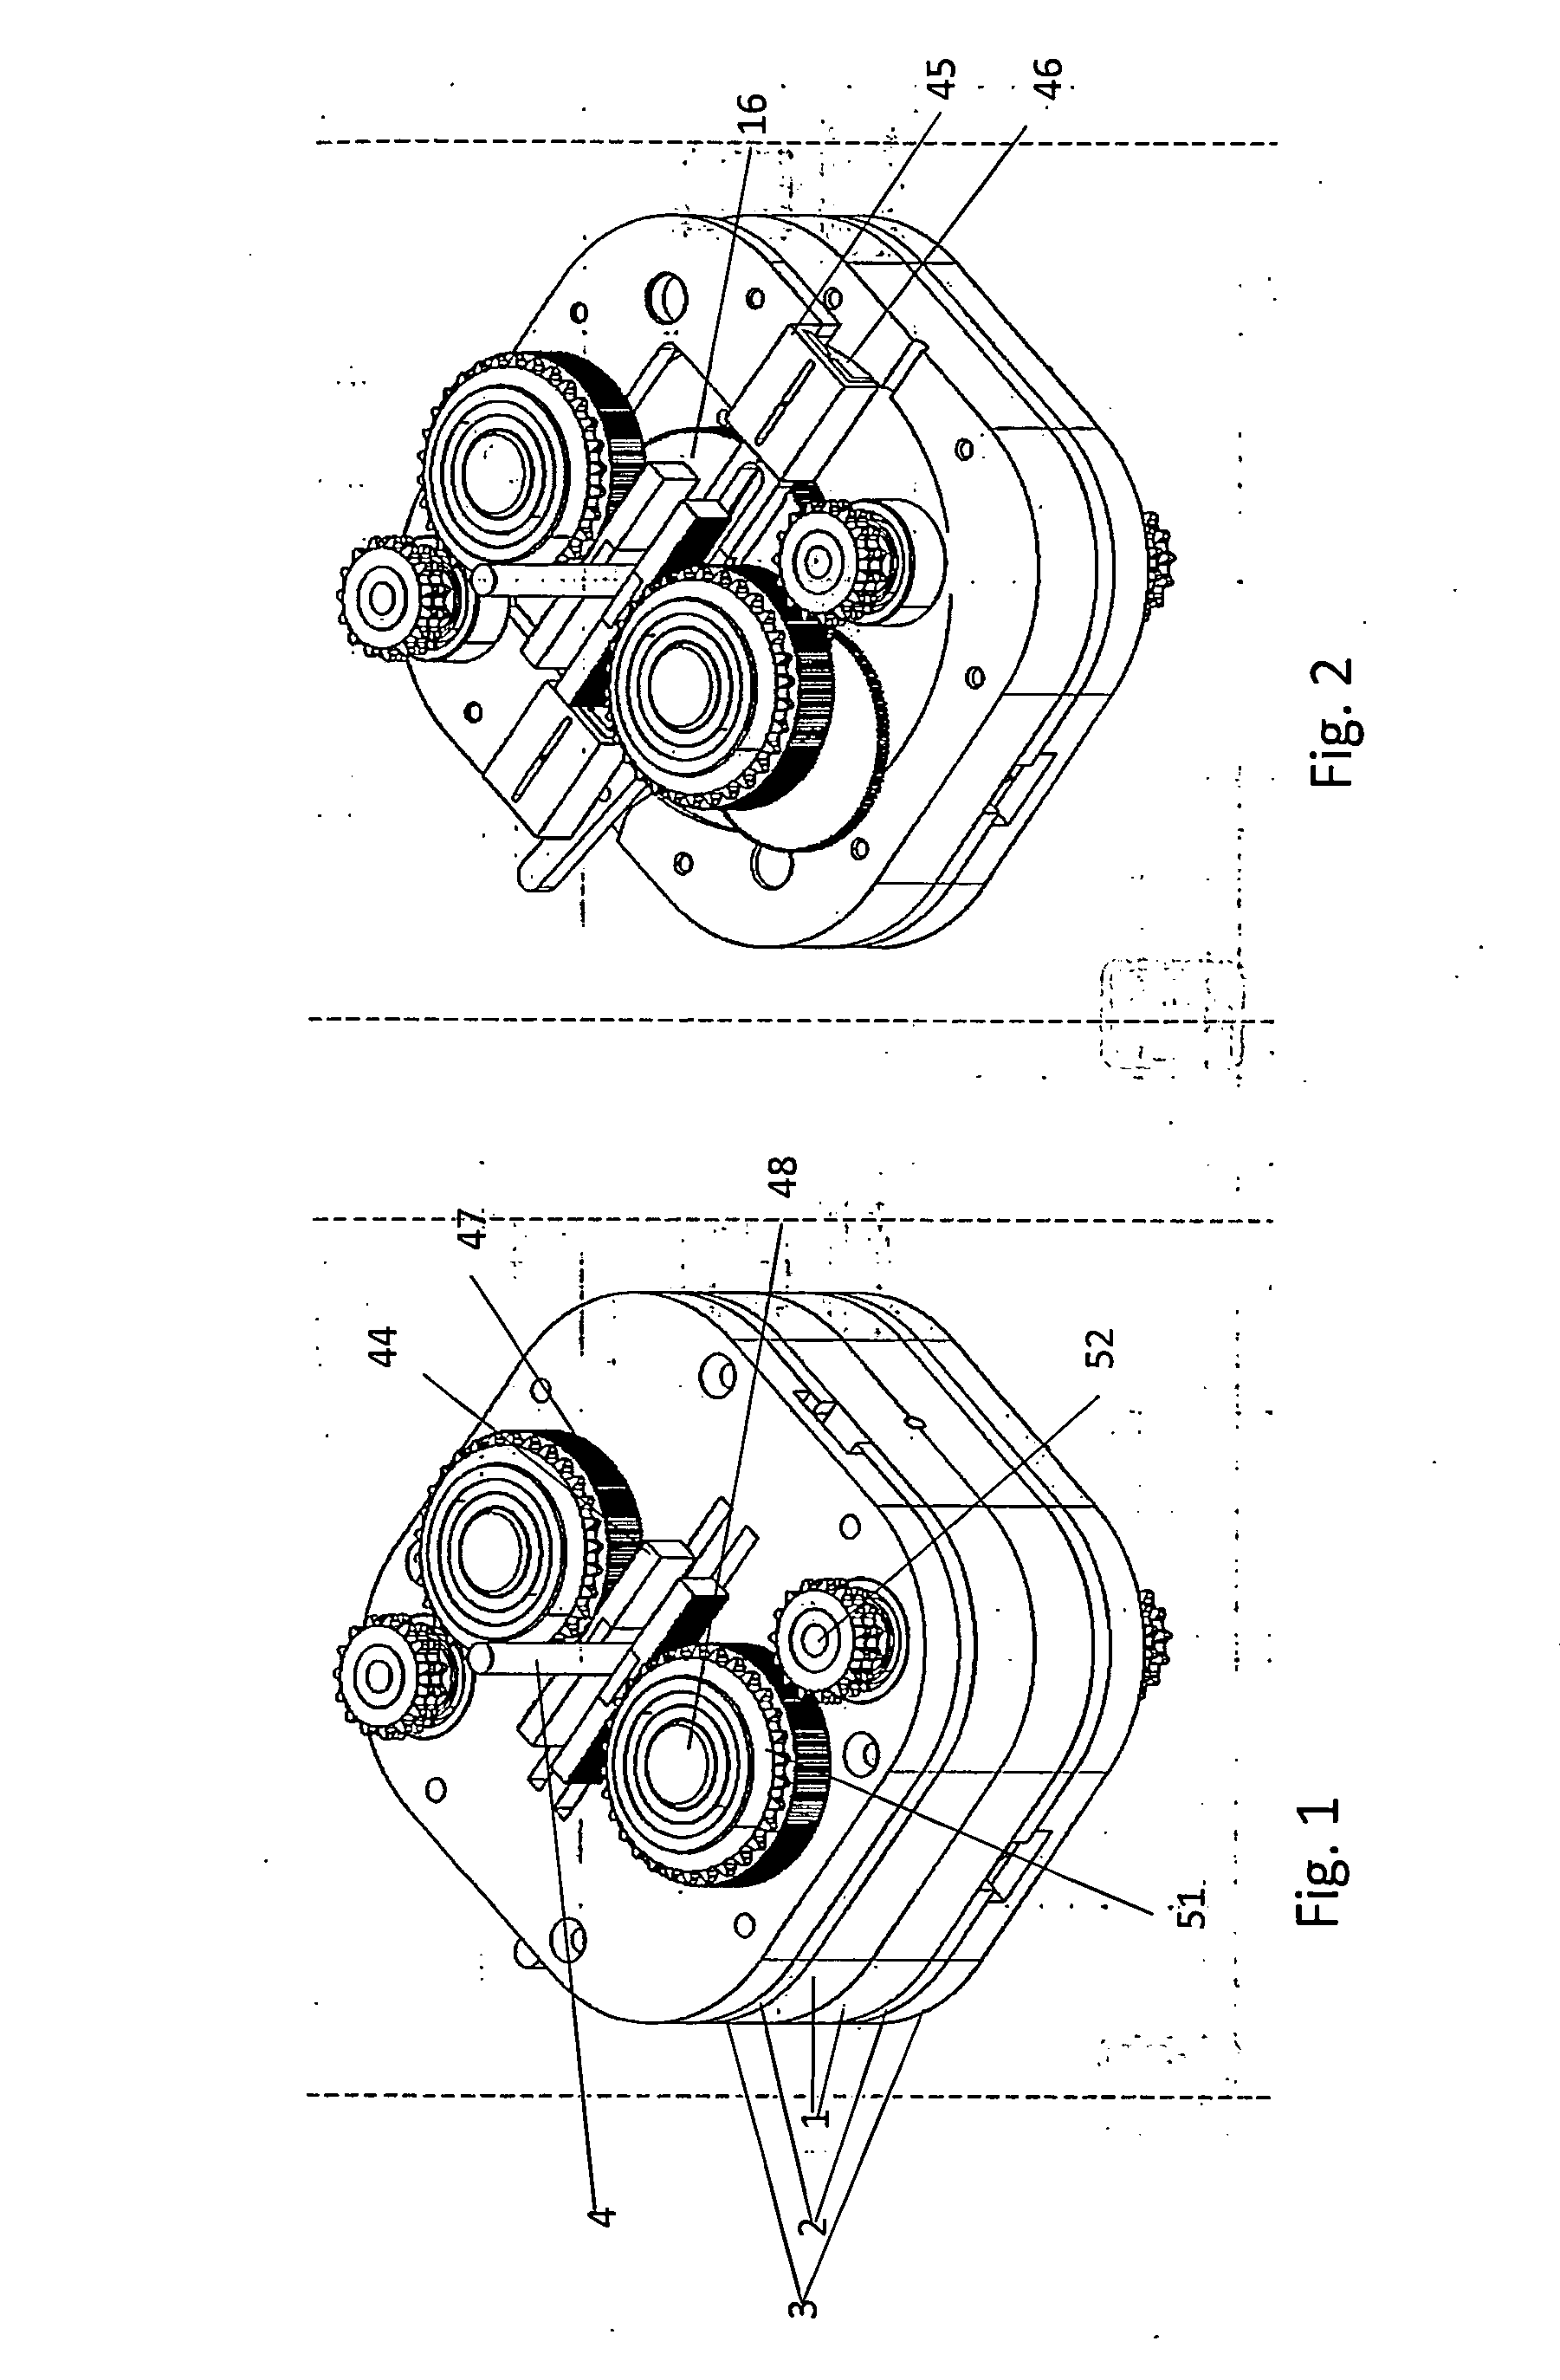 Continuous variable transmission with uniform input-to-output ratio that is non-dependent on friction